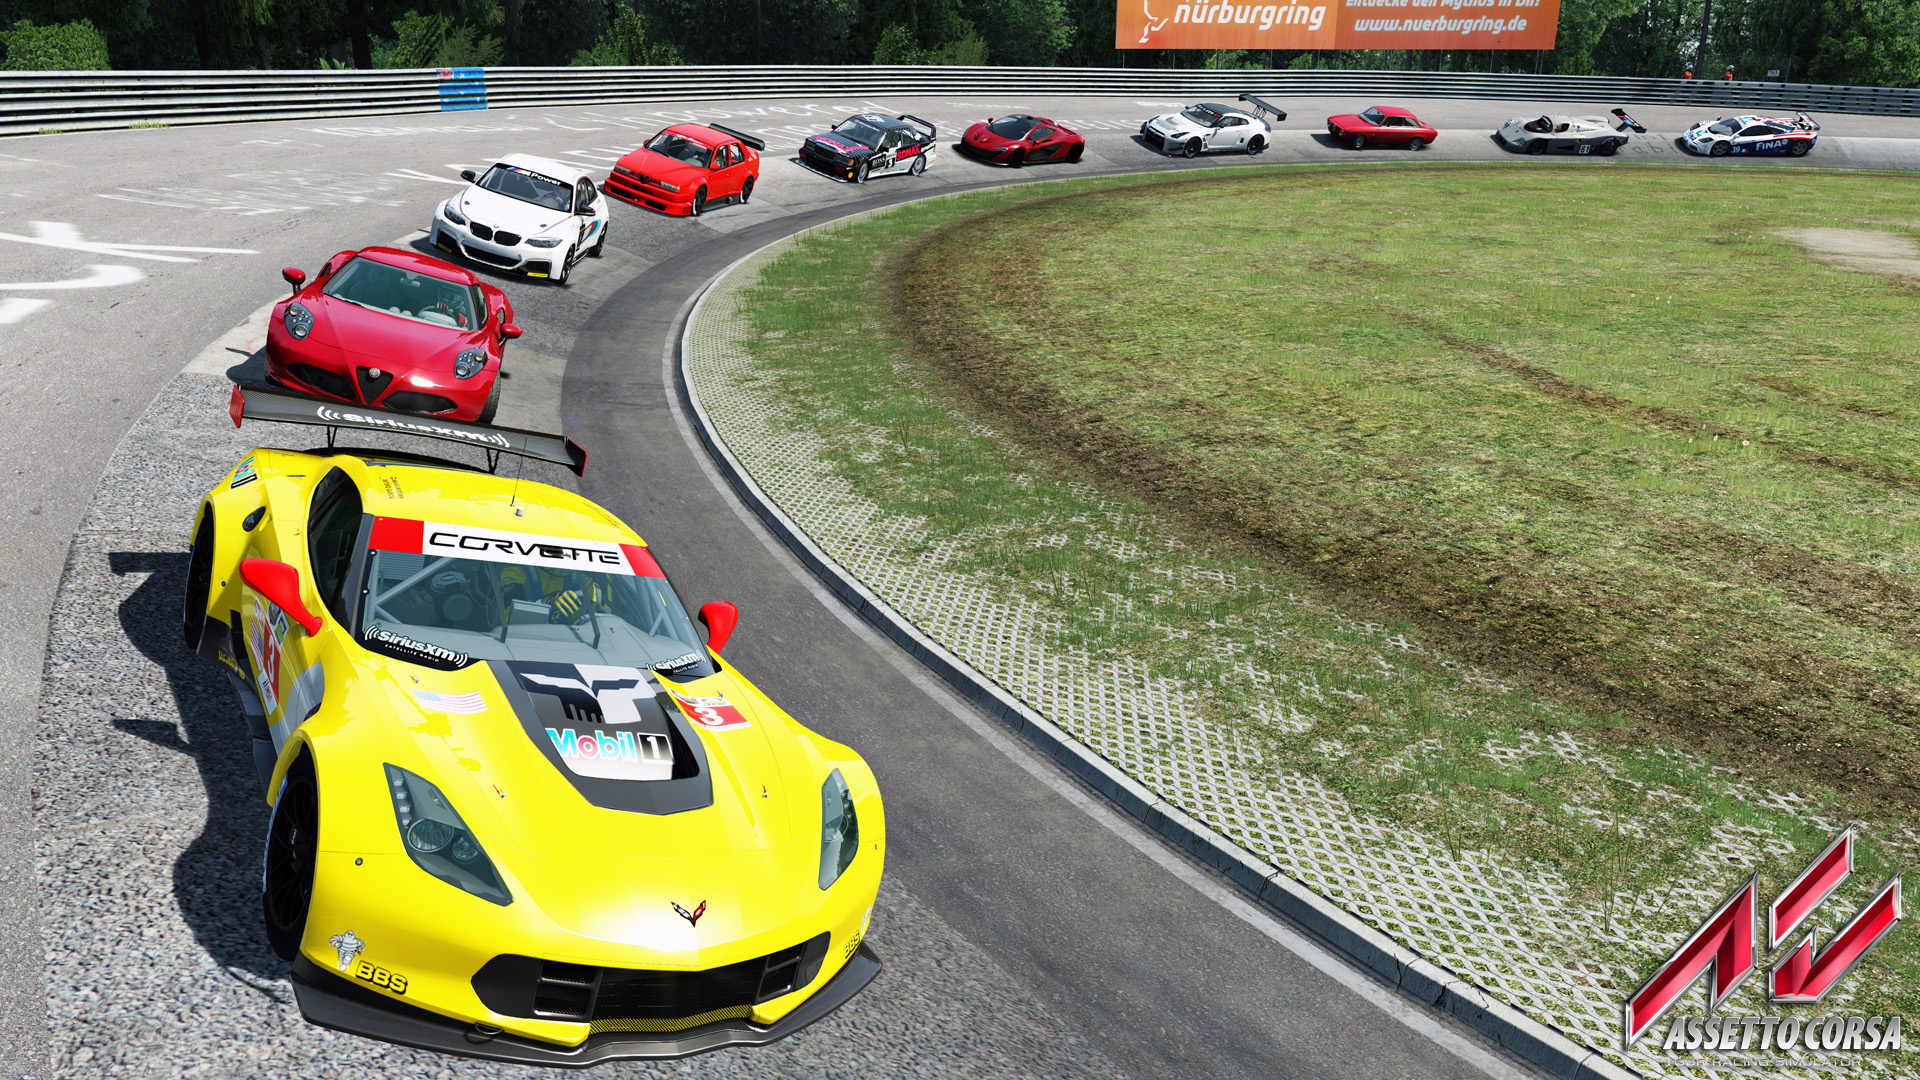 online racing games for pc